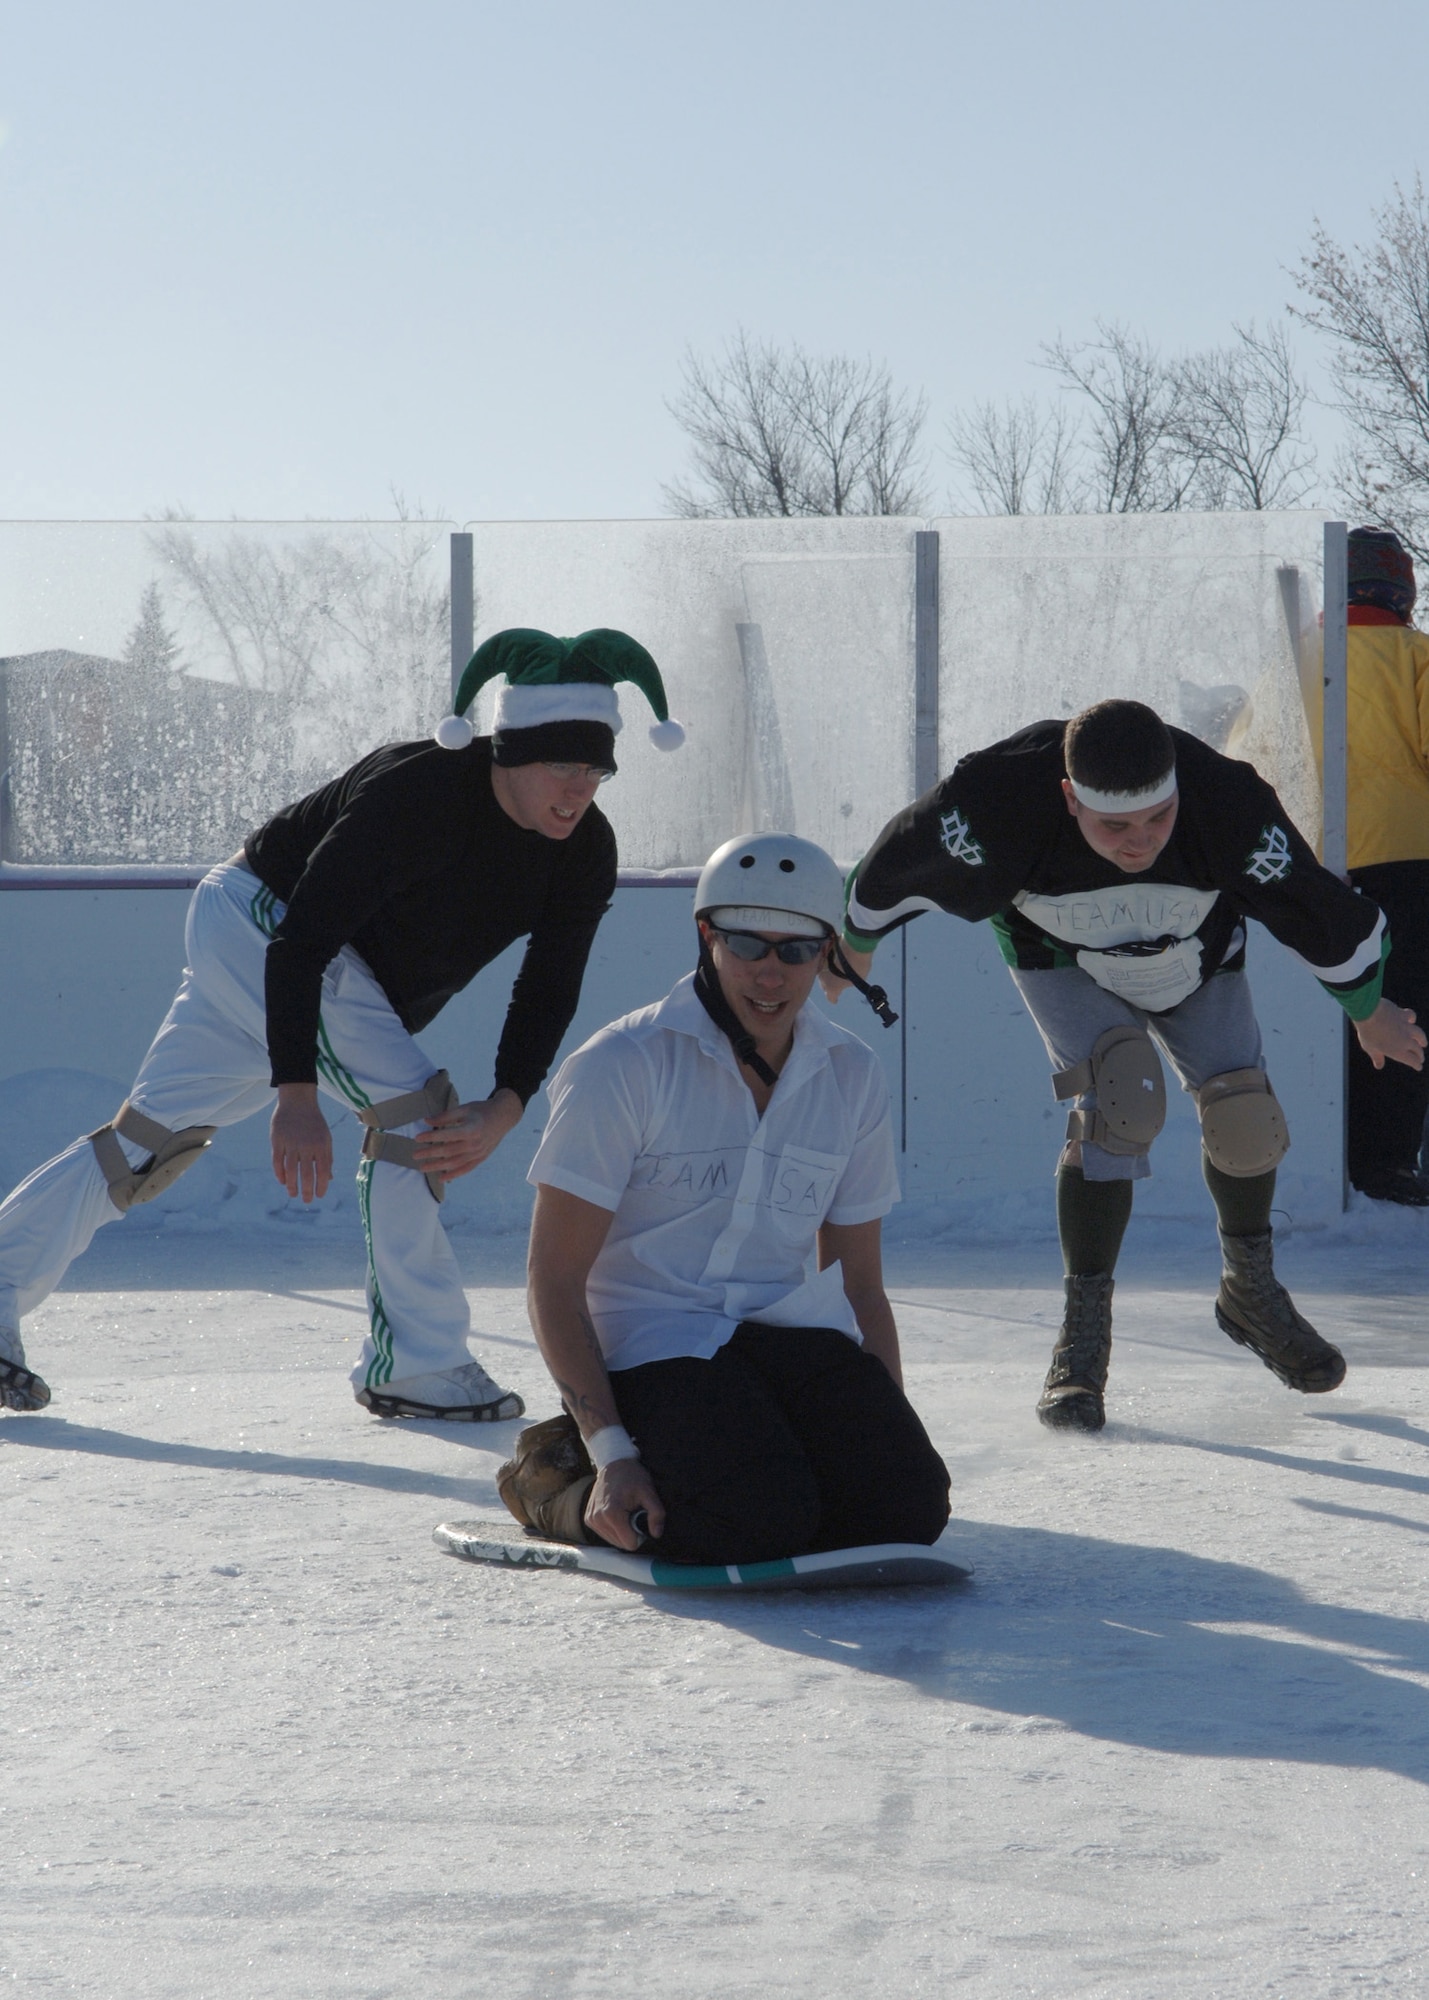 Senior Airman Christopher West, 319th Civil Engineer Squadron, middle, begins to slide after a push from Senior Airman Benjamin Bagnato, left, and Airman 1st Class Geoff Wadsworth, both 319th CES, right, during the Winter Bash?s human curling event at the base ice skating rink. The teams were composed of three members from each Squadron and the winner was judged on far the person on the sled was pushed. (U.S. Air Force phot/Senior Airman Tiffany Colburn)